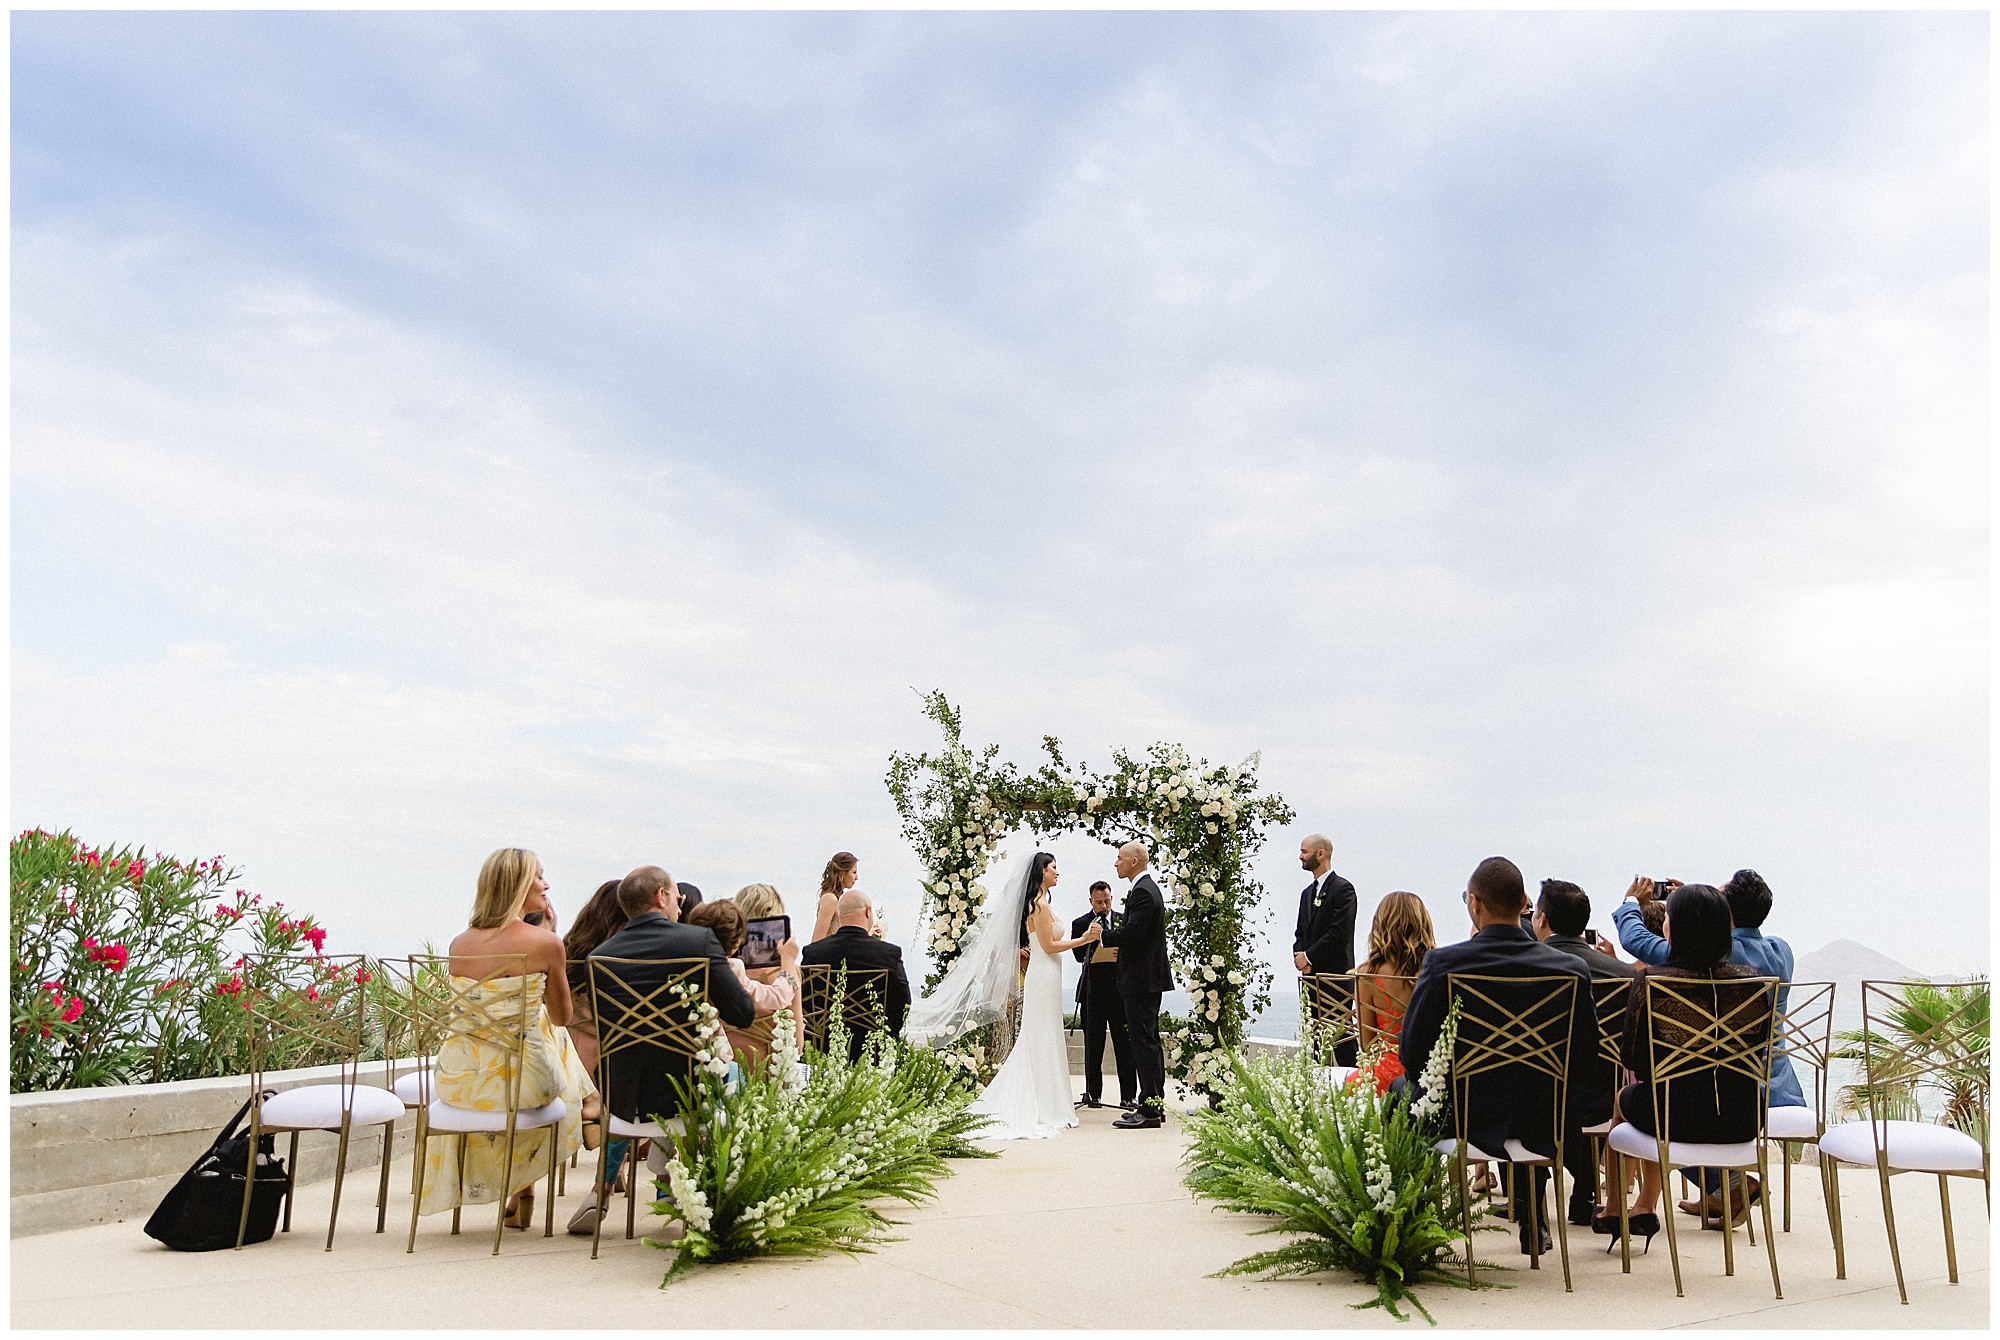 The cape a thompson hotel wedding ceremony